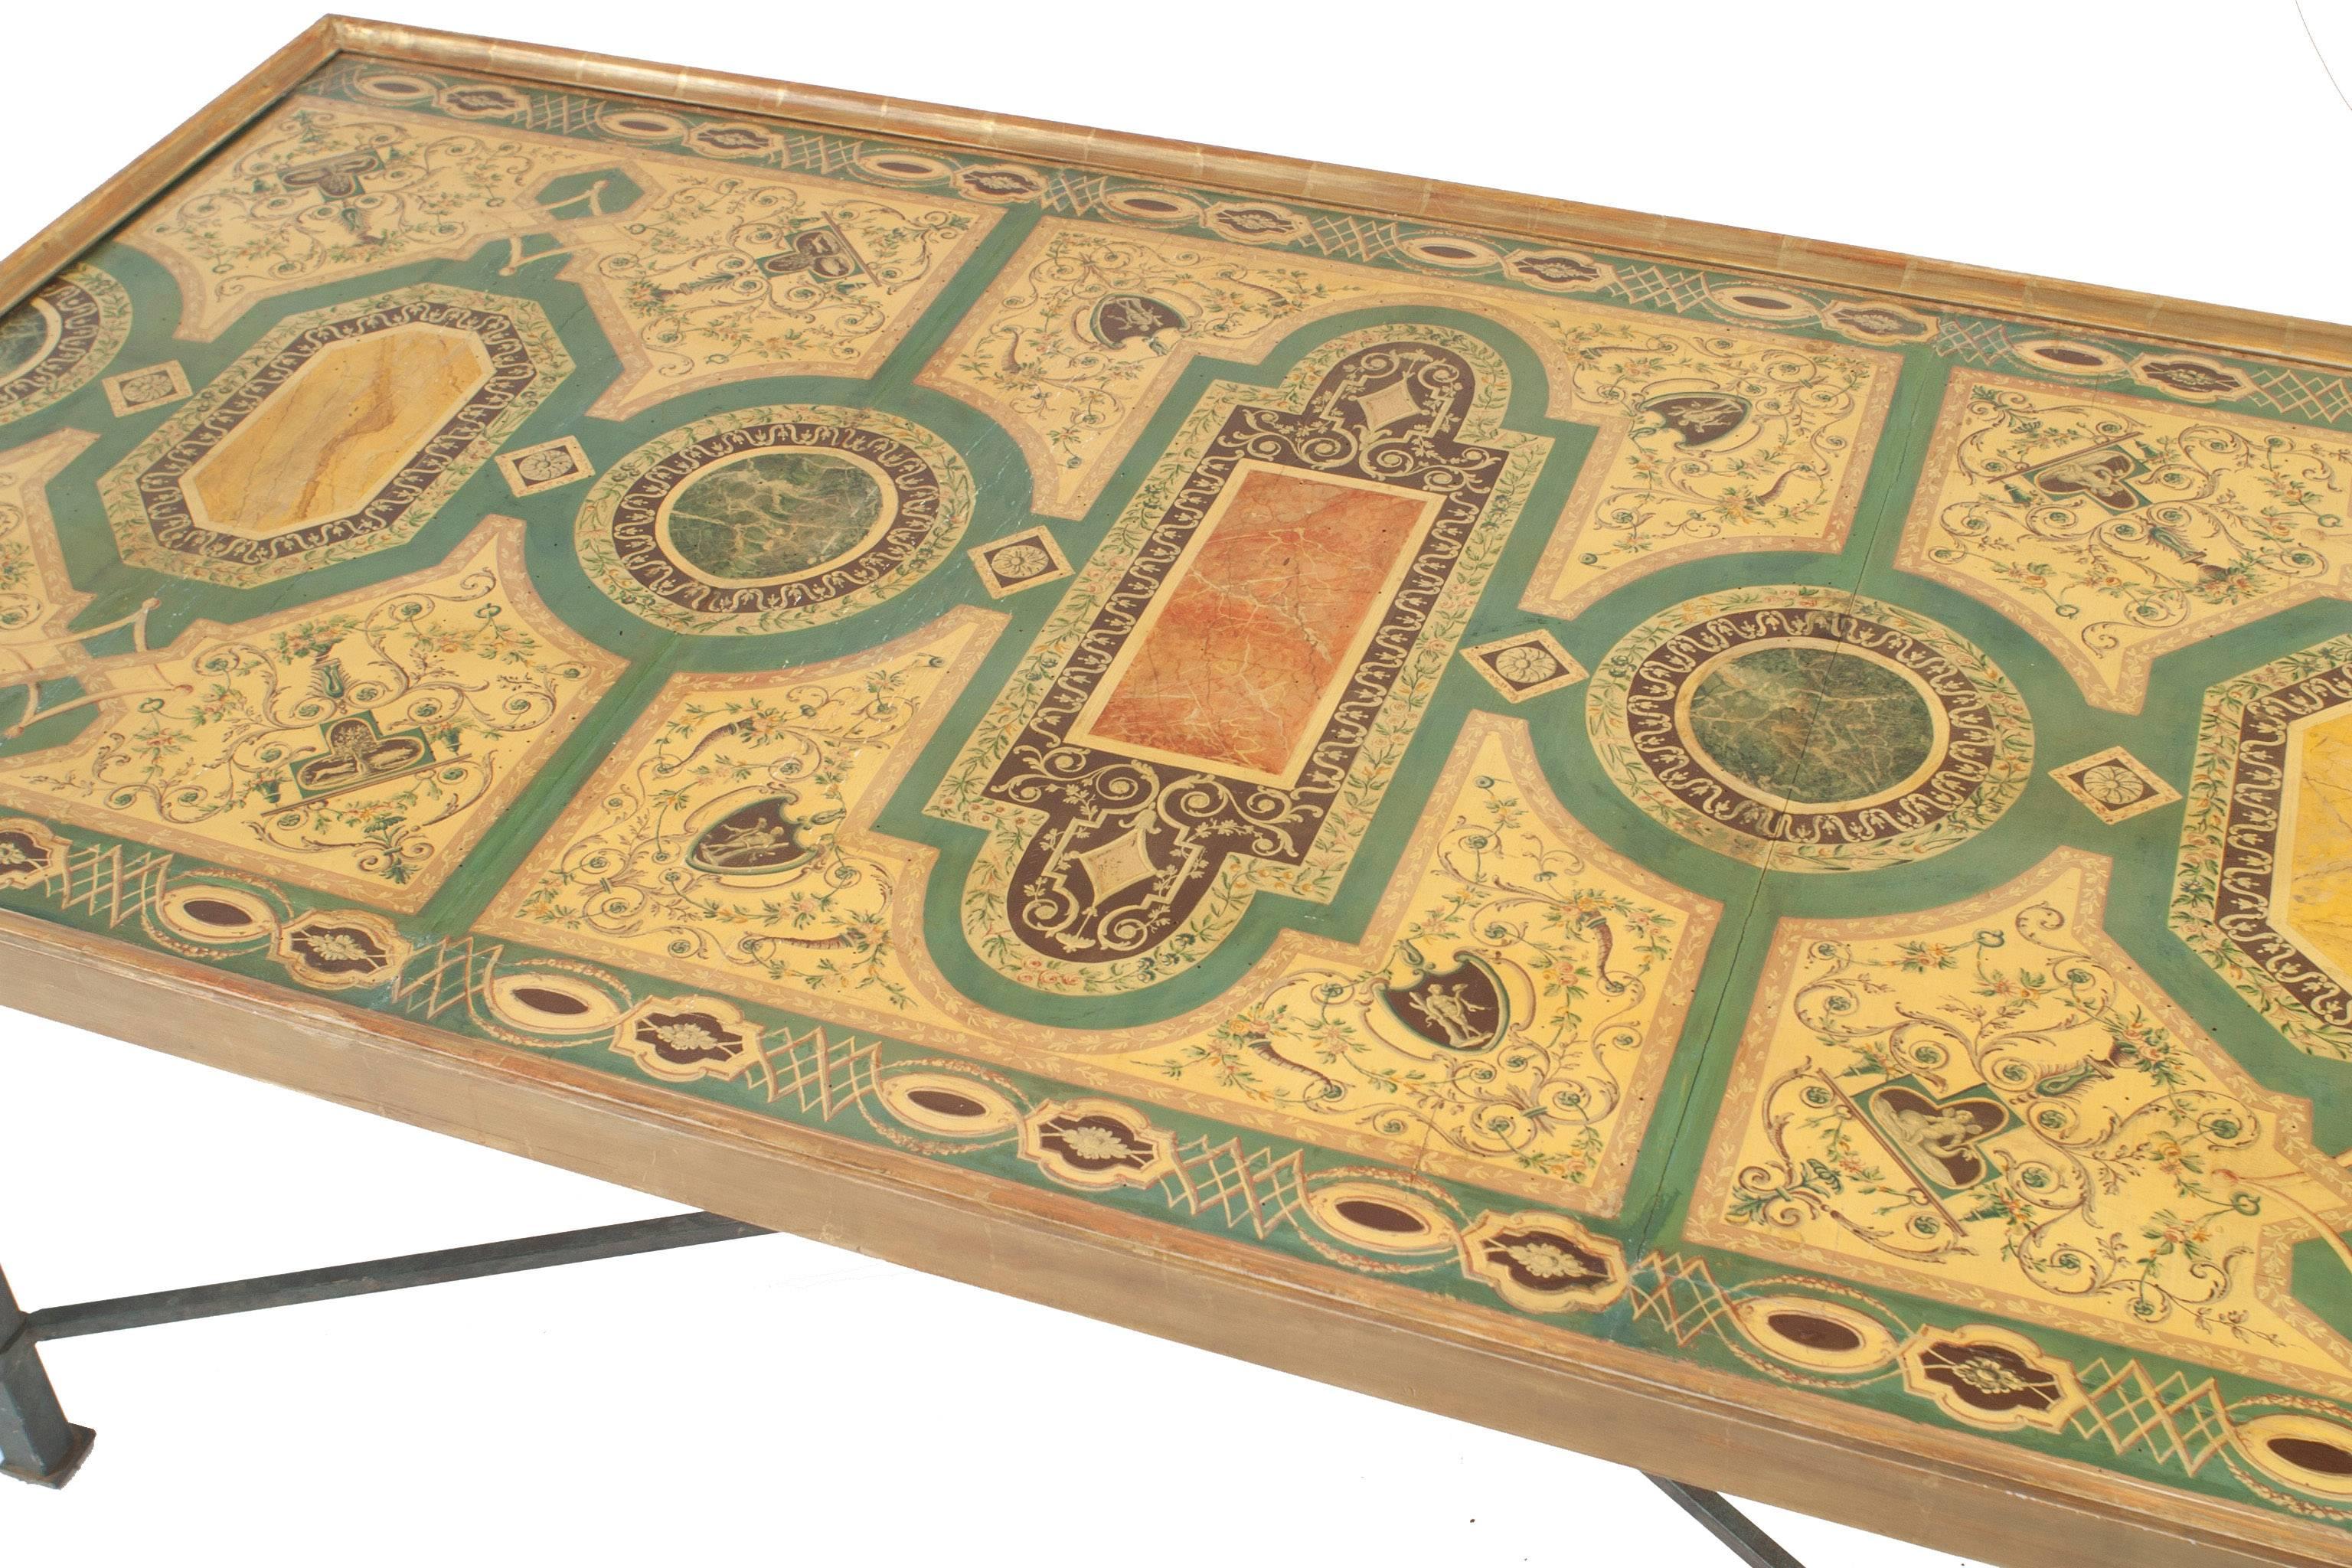 Italian Roman Neoclassic rectangular coffee table with a mid-18th century panel decorated in a Pompeiian style faux marble inlaid patterns within a gilt frame resting on an iron base (Two matching end tables available).